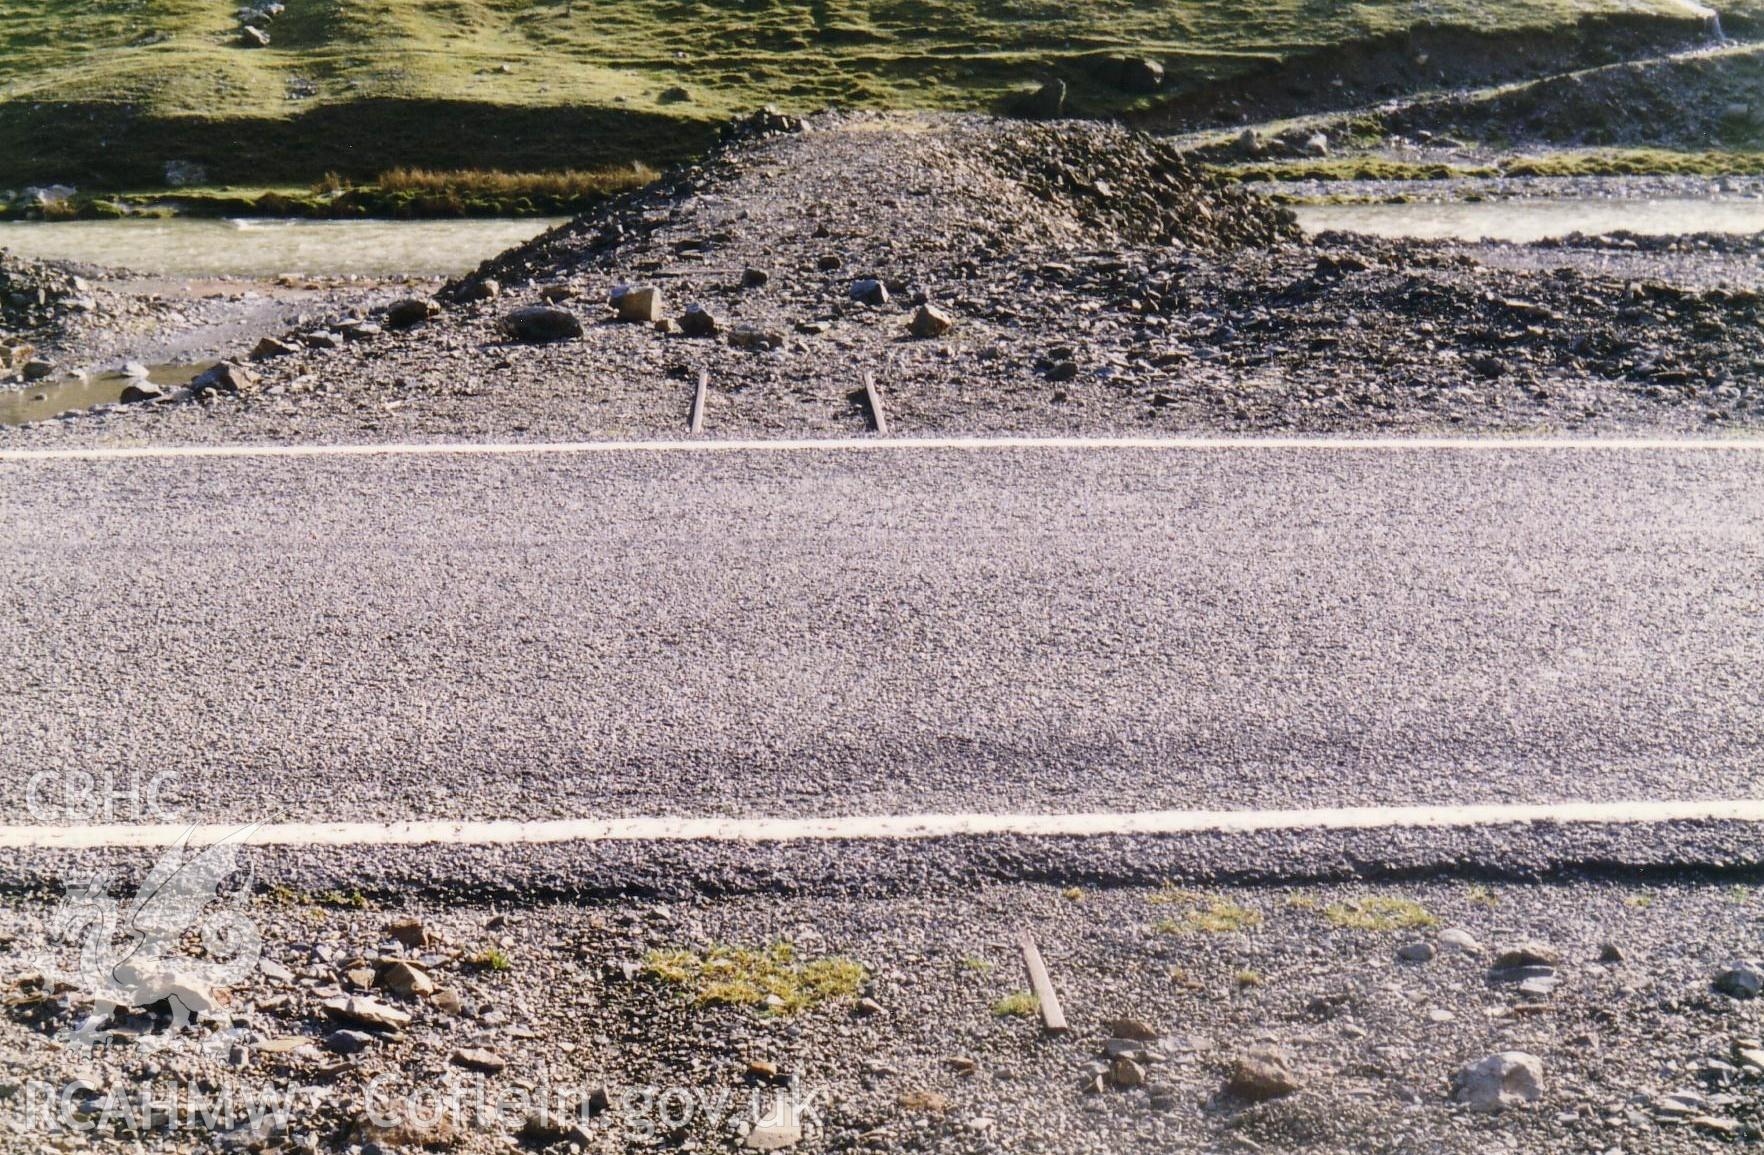 Tramway rails from Level y Ffordd buried under the road.